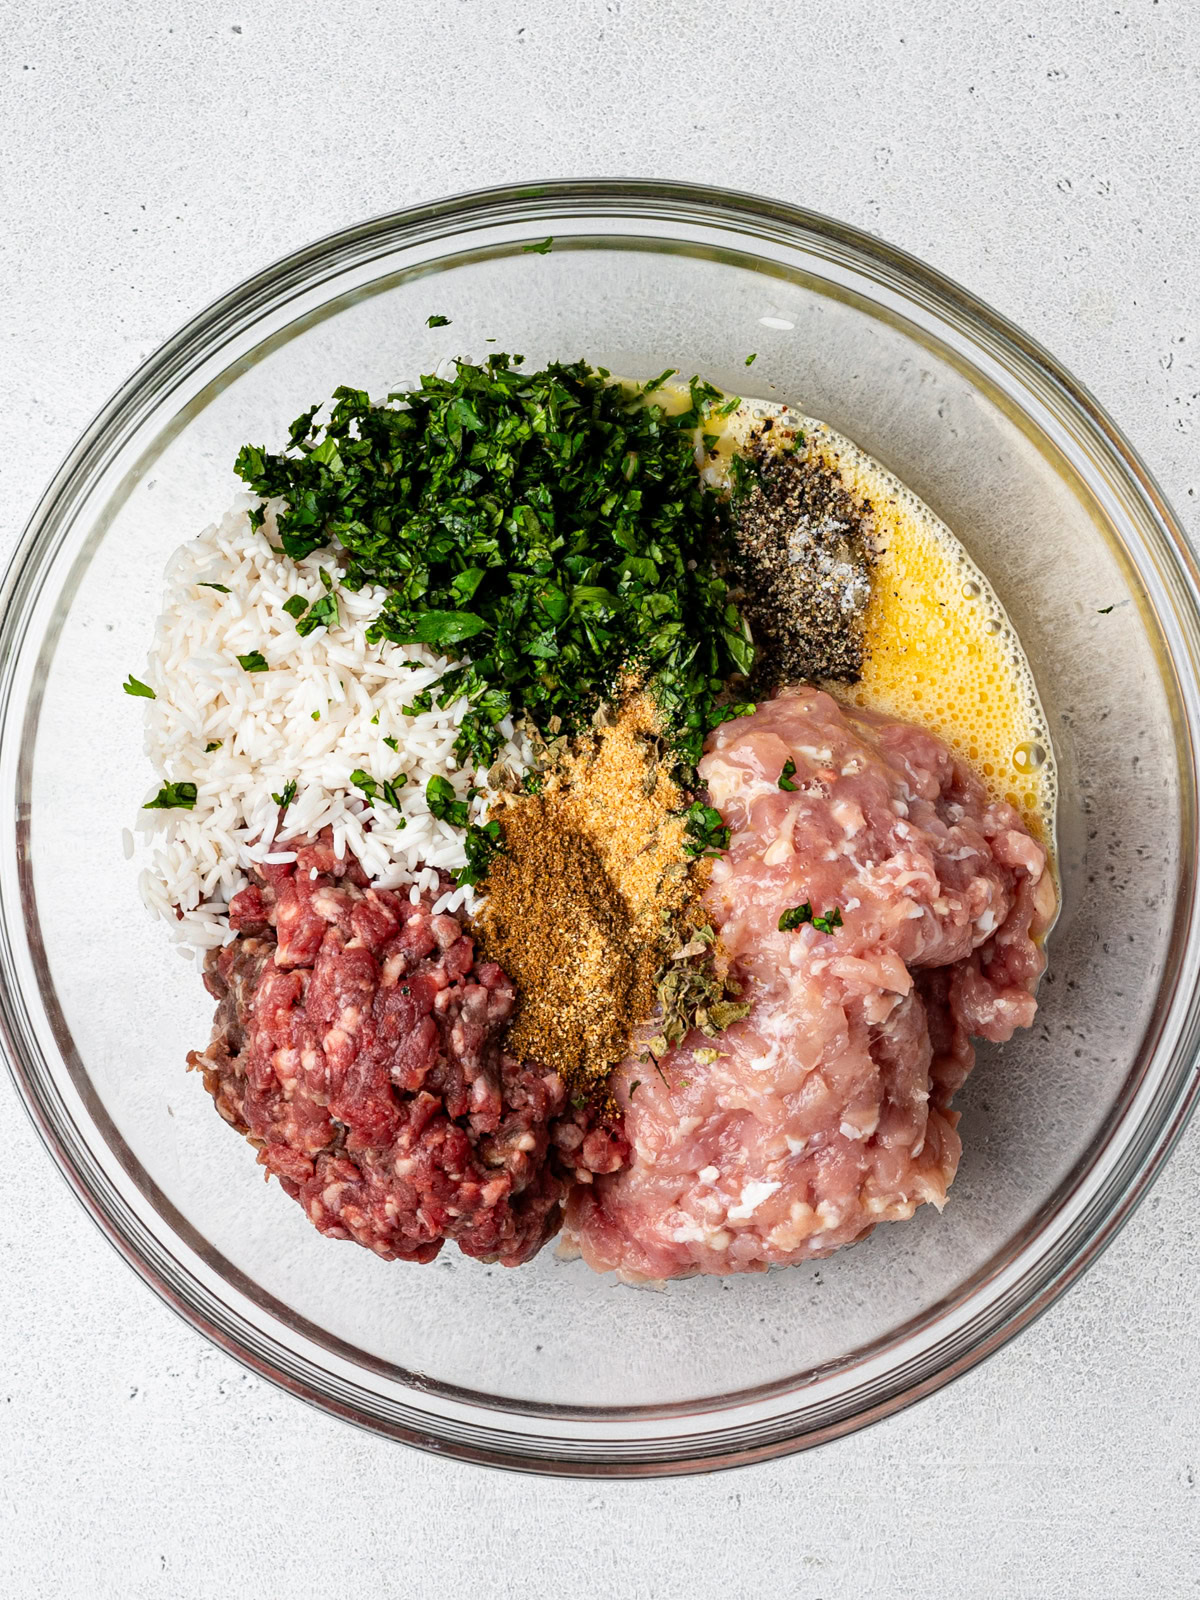 meatball ingredients in a glass bowl